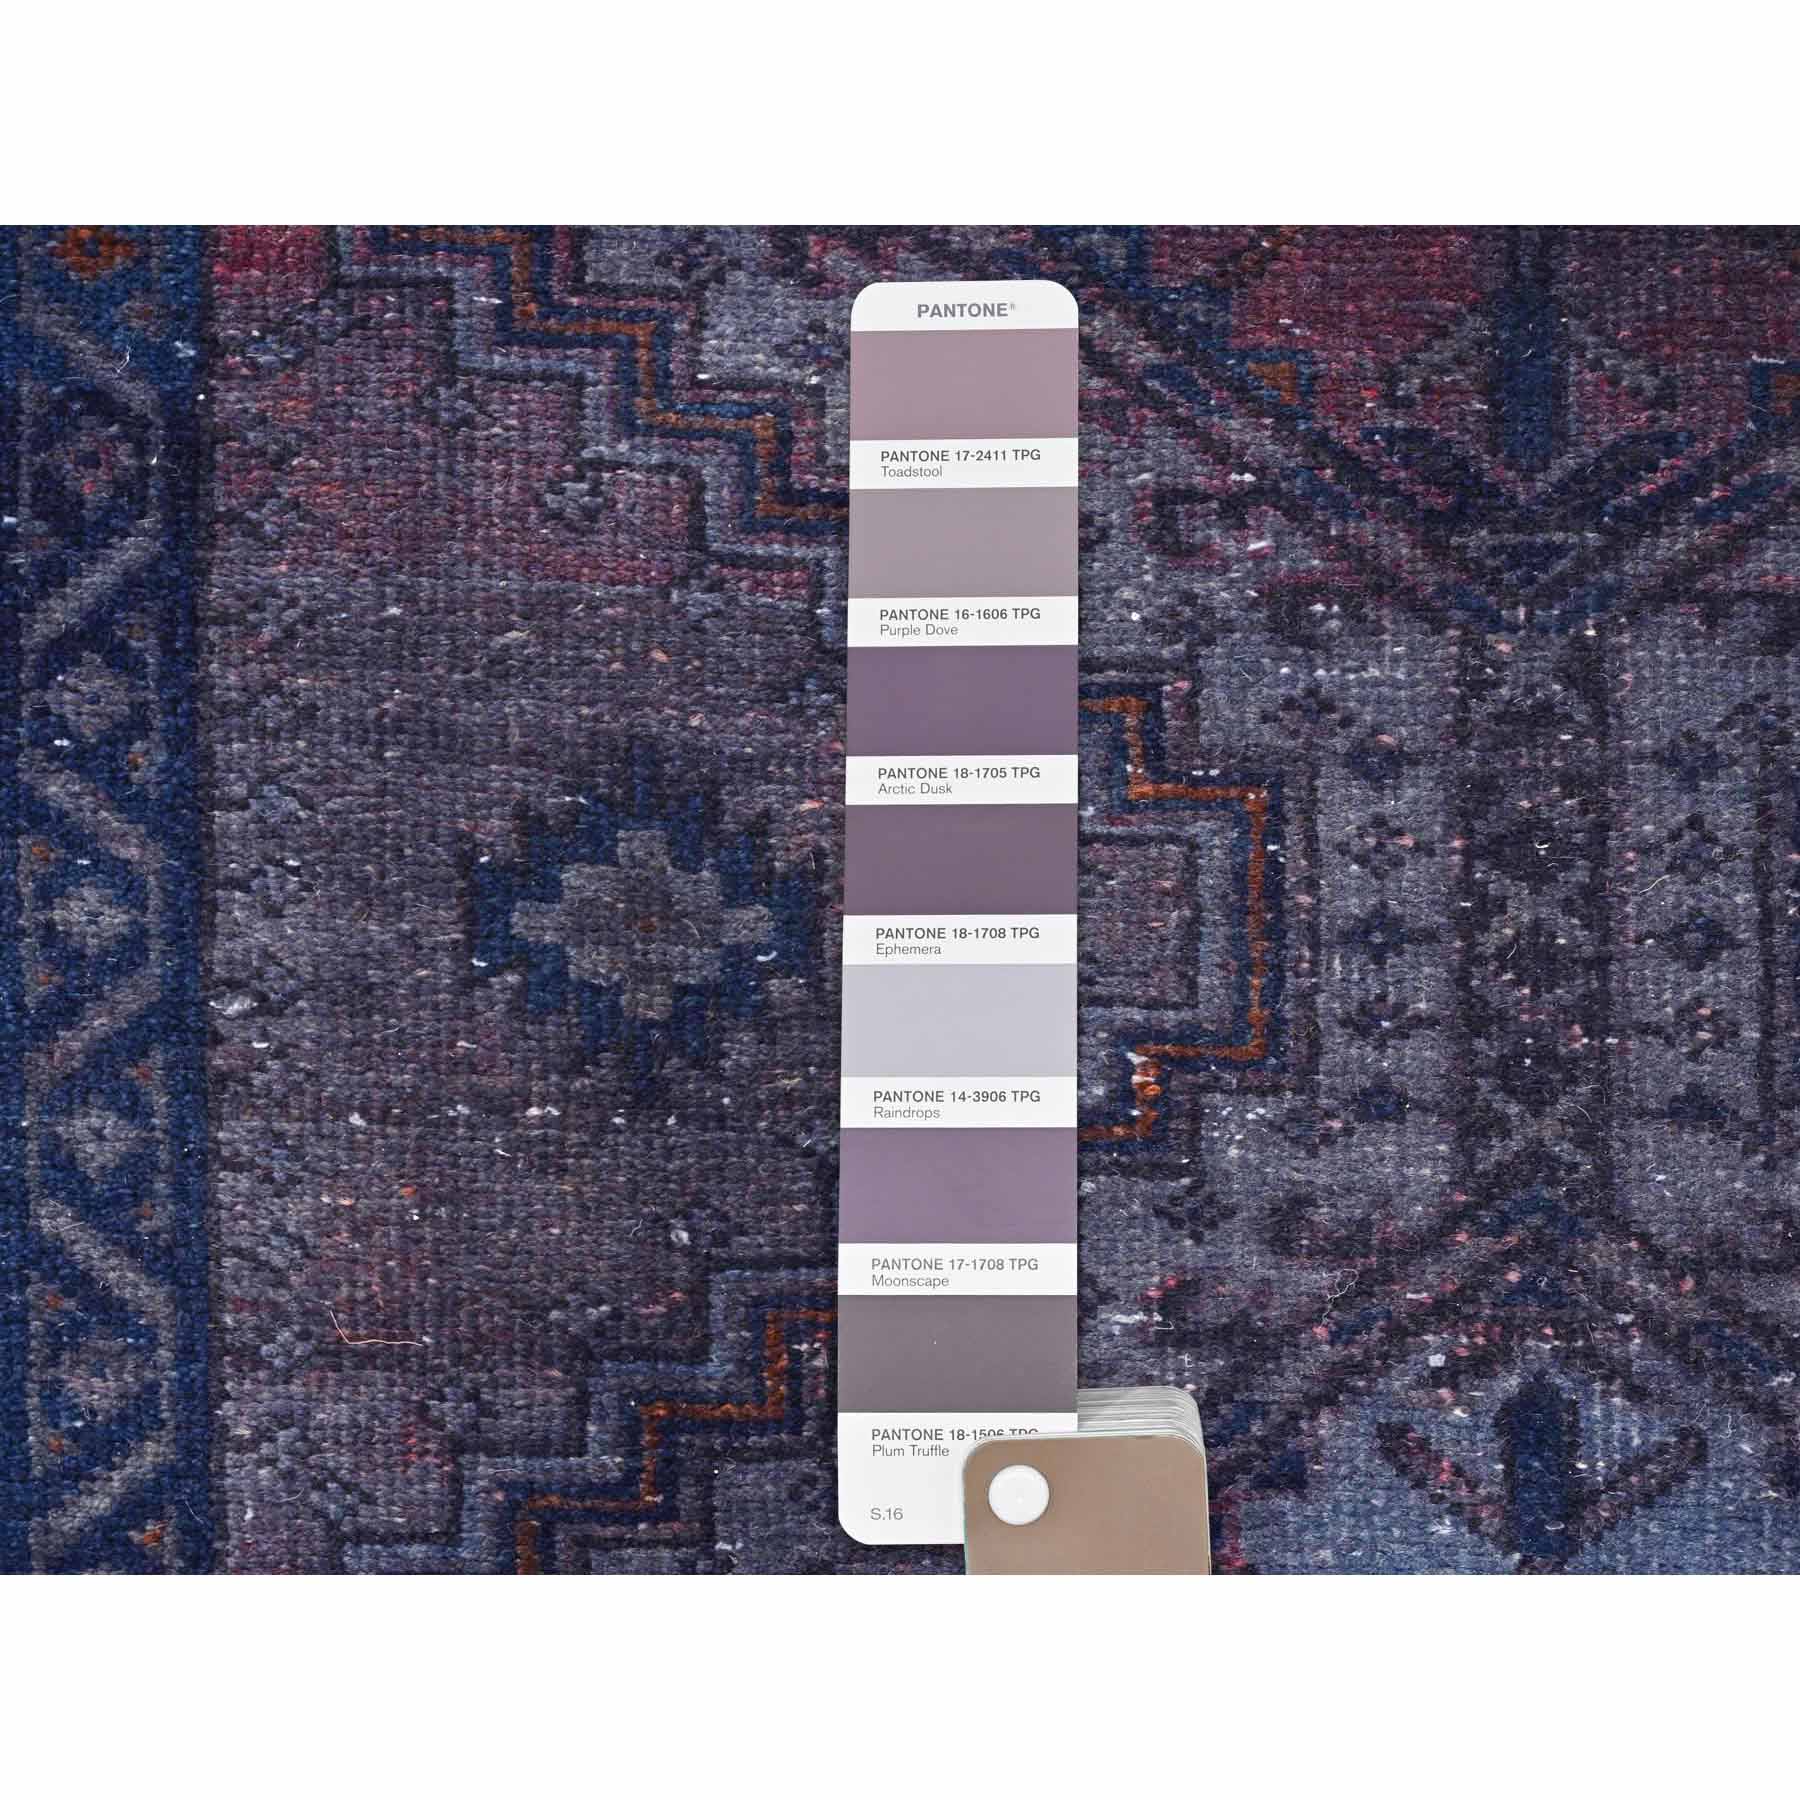 Overdyed-Vintage-Hand-Knotted-Rug-409440